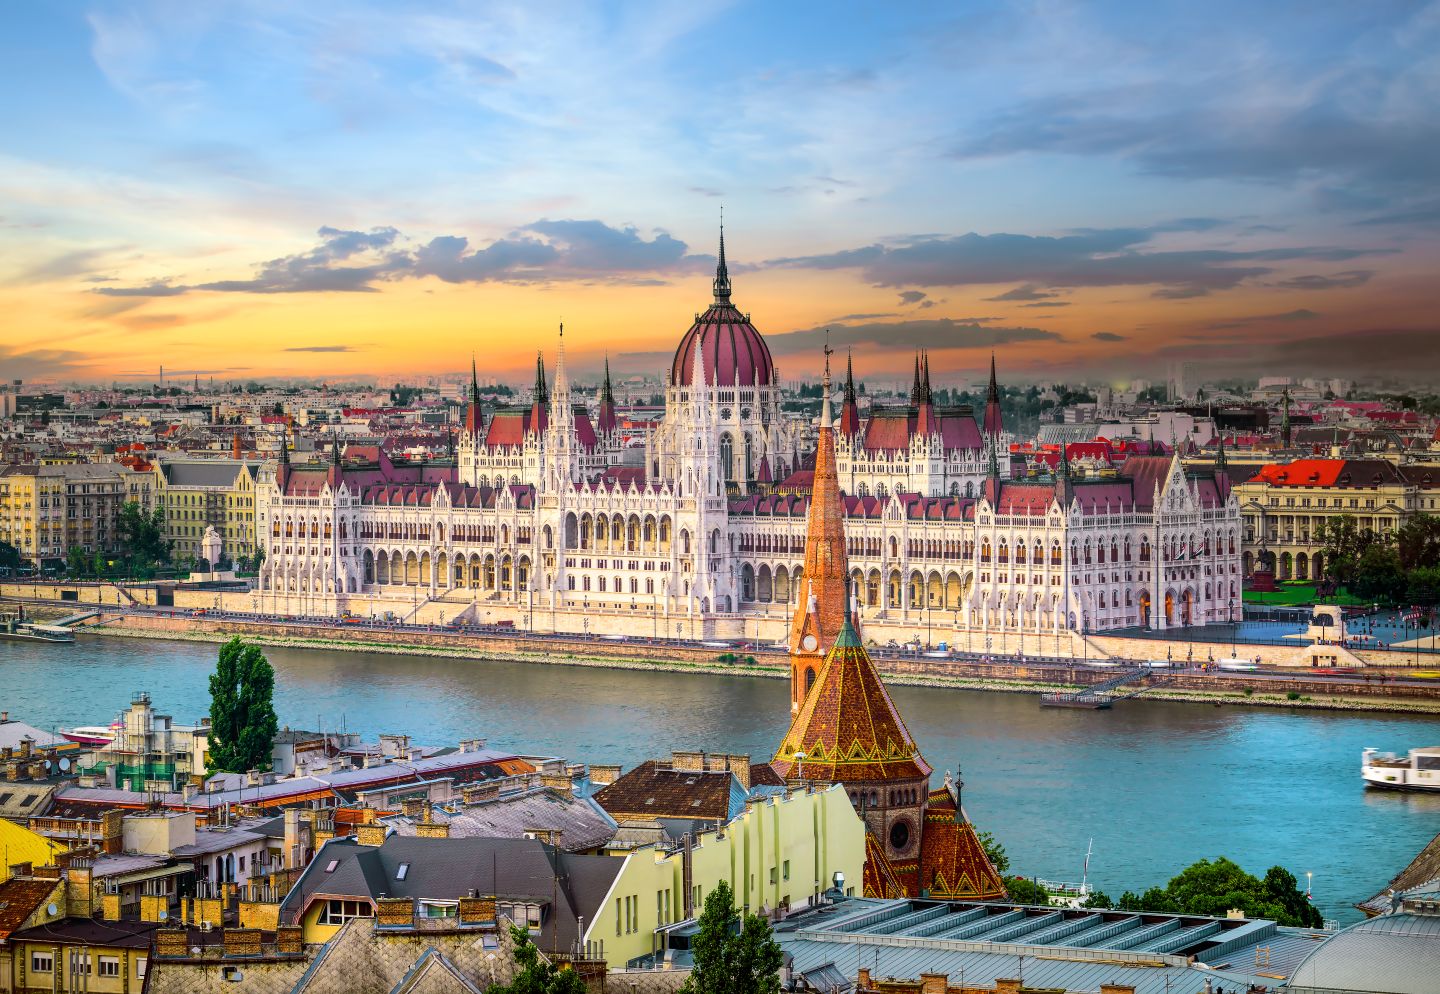 Are You Smarter Than A 5th Grader Questions Hungarian Parliament Building, Budapest, Hungary